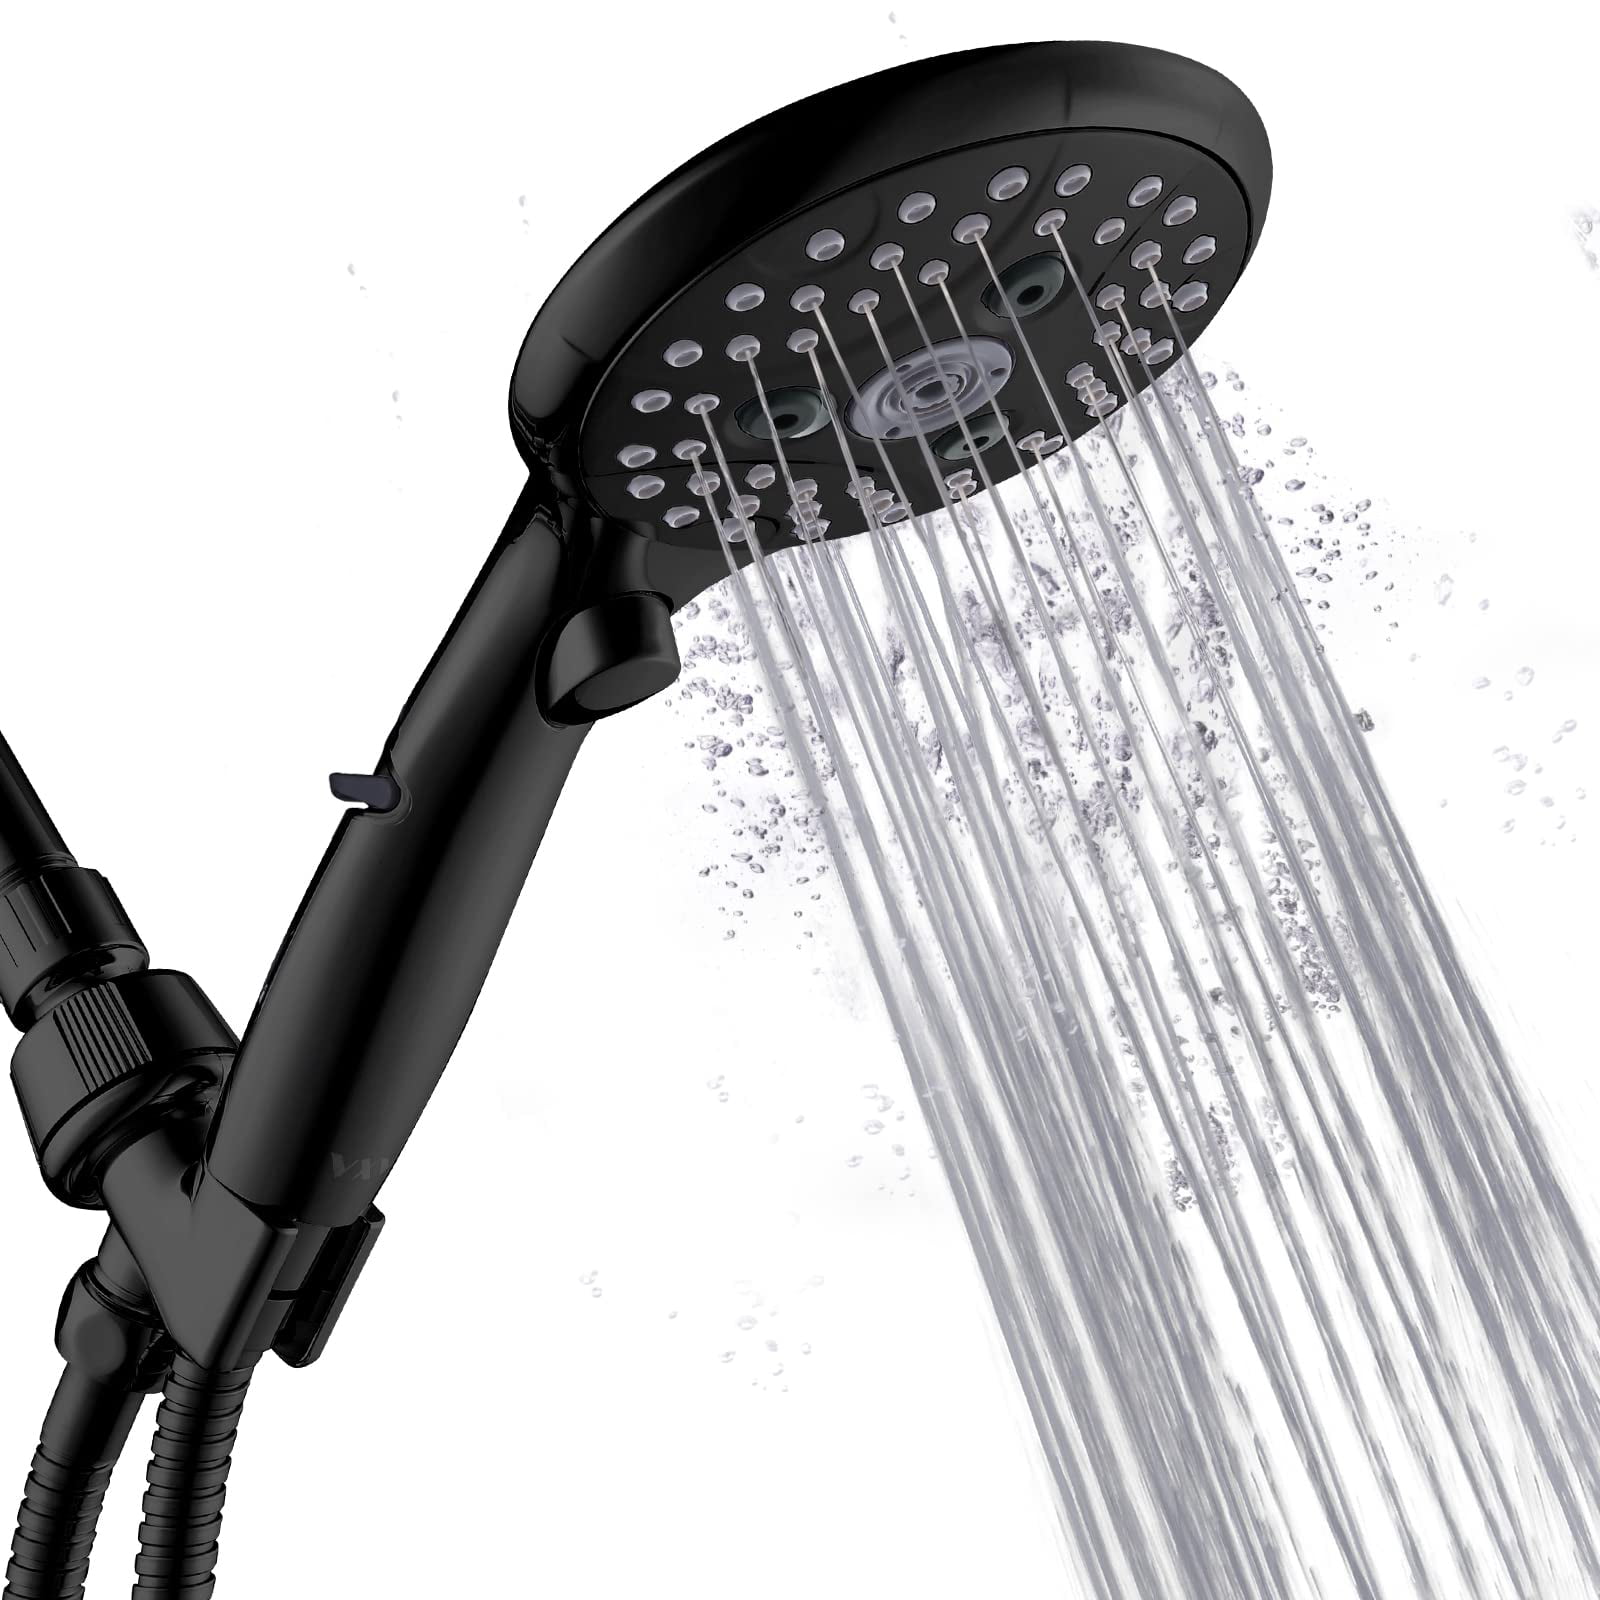 Matte Black 6 Spray Setting Removable Hand Held Showerheads with 6 FT Stainless steel Hose and Adjustable Angle Bracket VXV Bathroom Handheld Shower Head with on off Switch